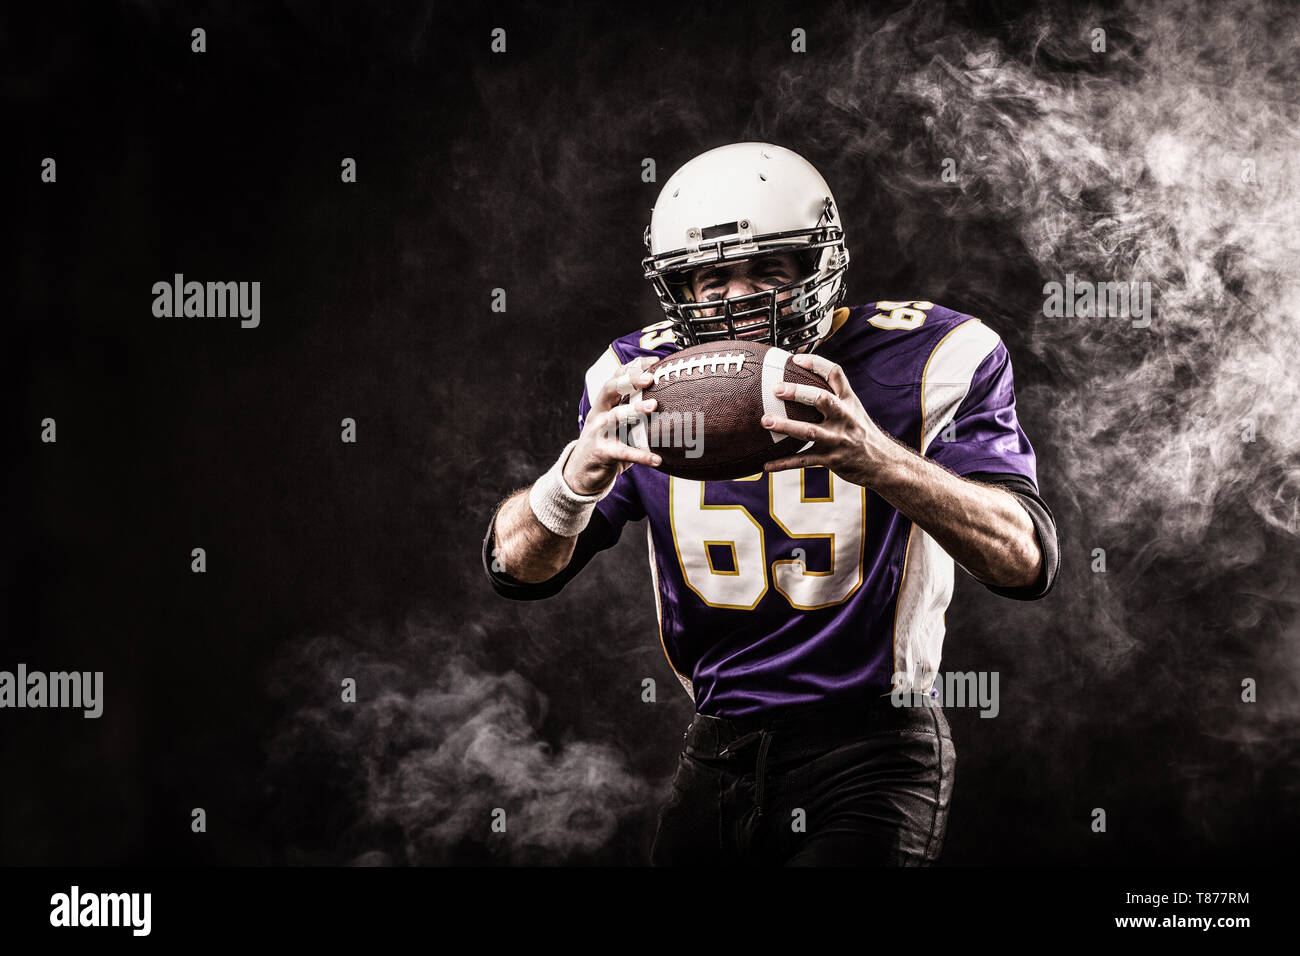 American Football Player Holding Ball In His Hands In Smoke Black Background Copy Space The Concept Of American Football Motivation Copy Space Stock Photo Alamy